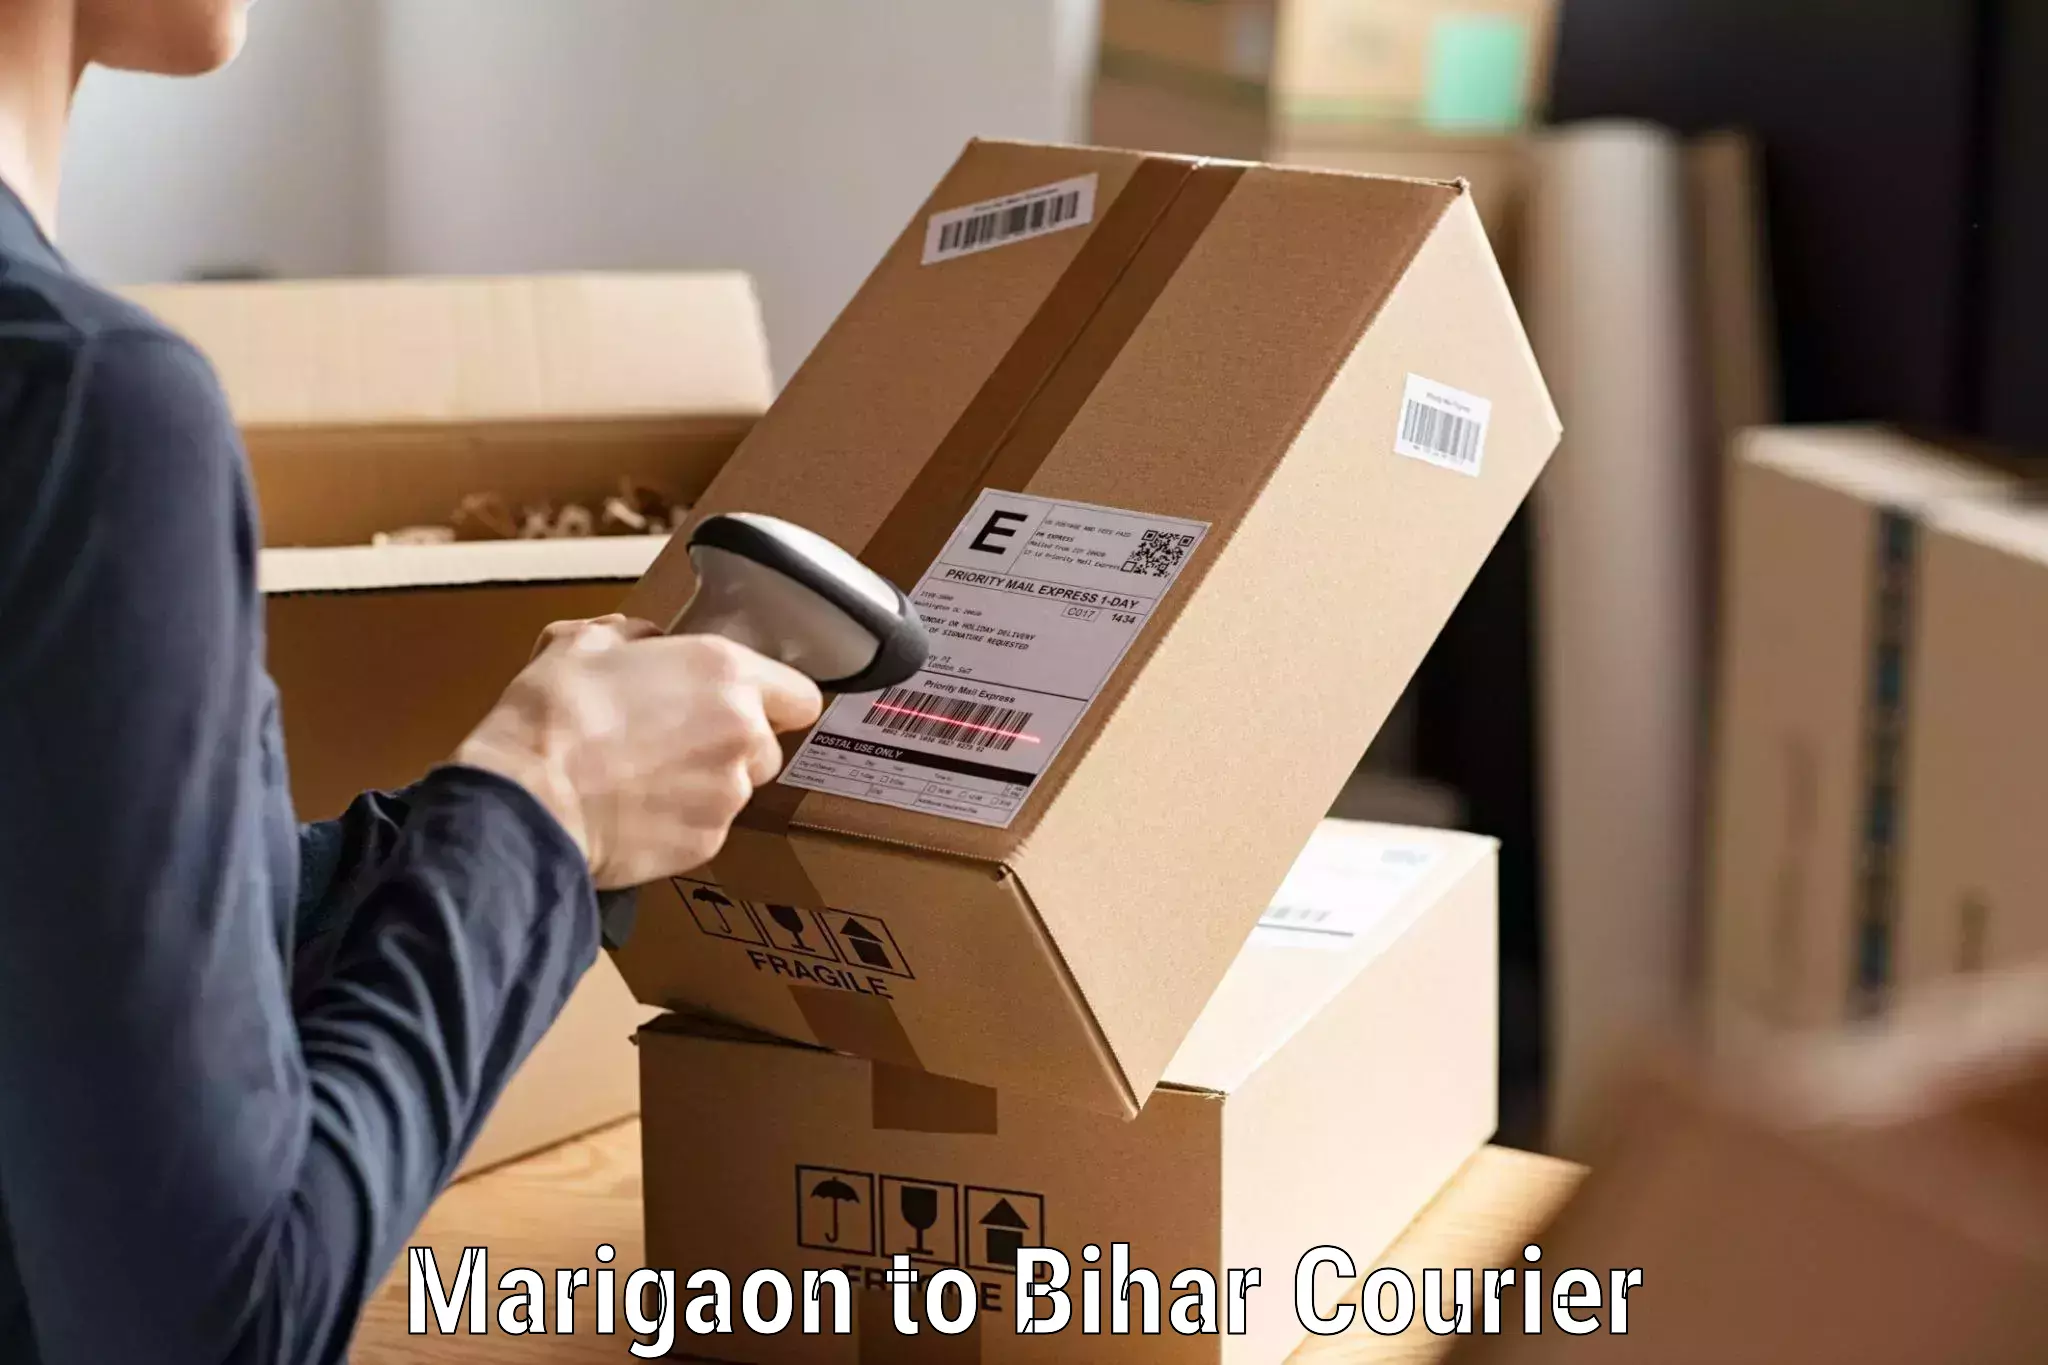 Flexible delivery scheduling Marigaon to Patna